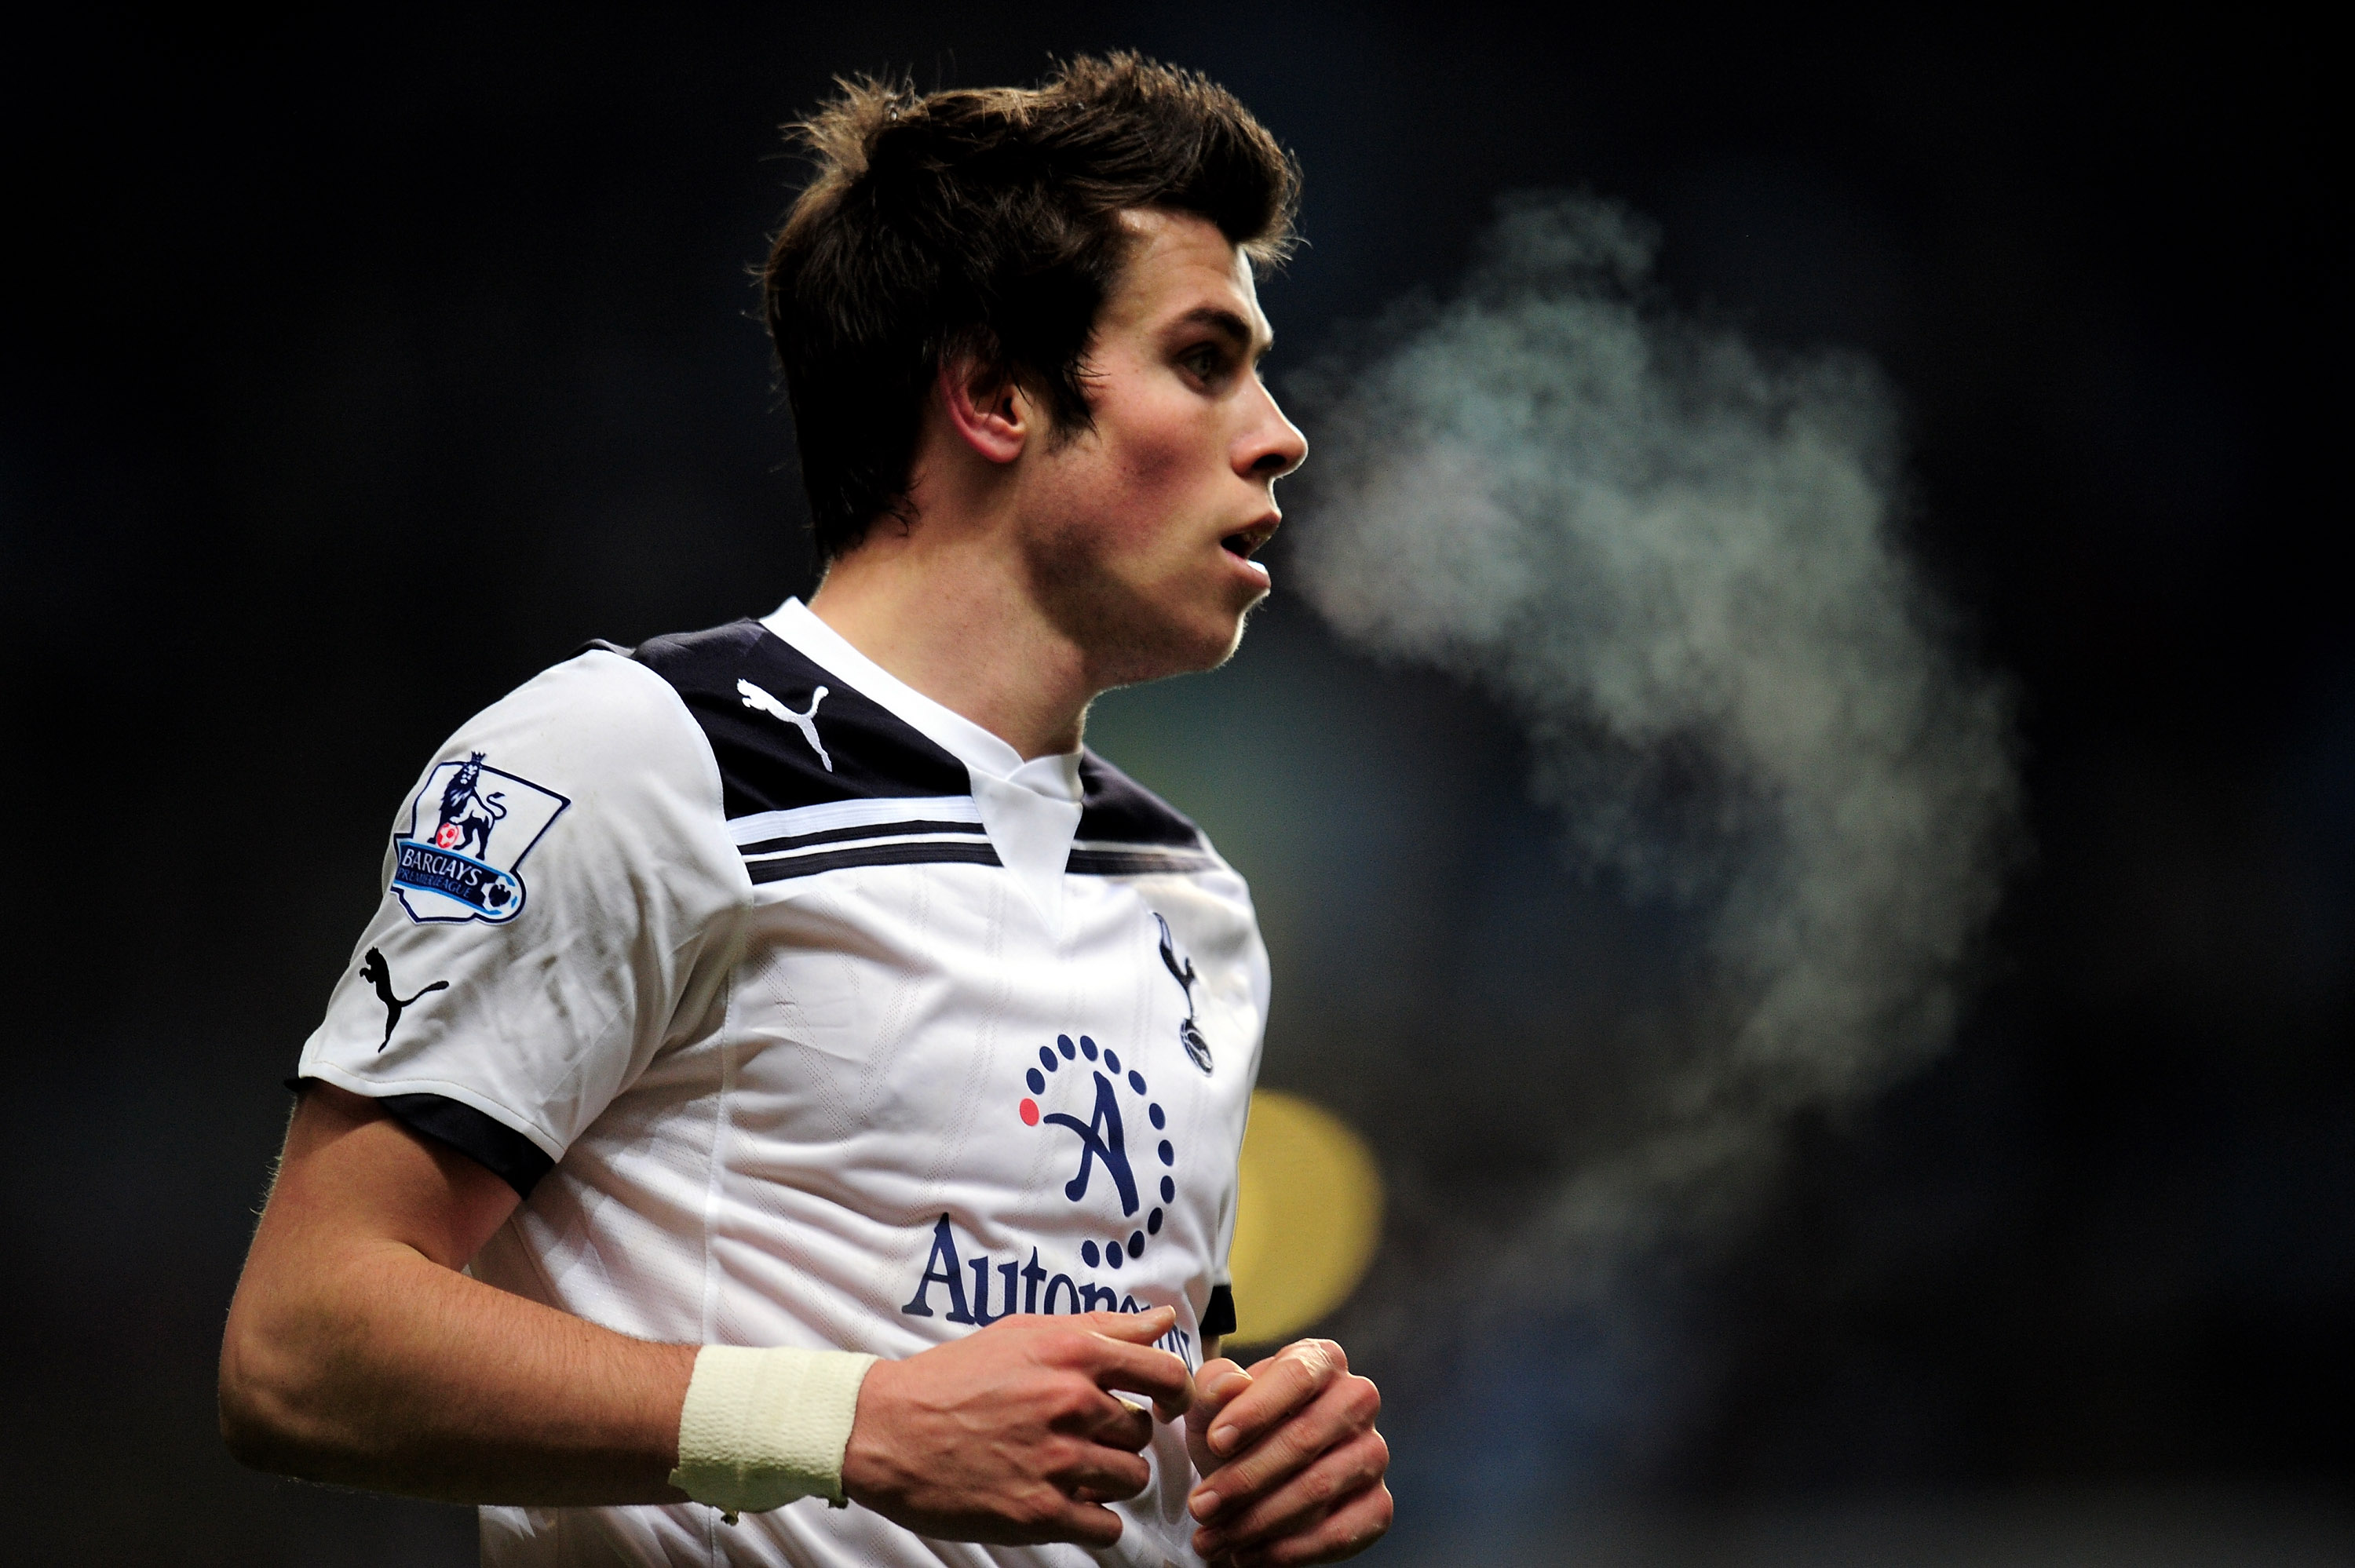 Was 2010 a freak year for Bale or is he here to stay?